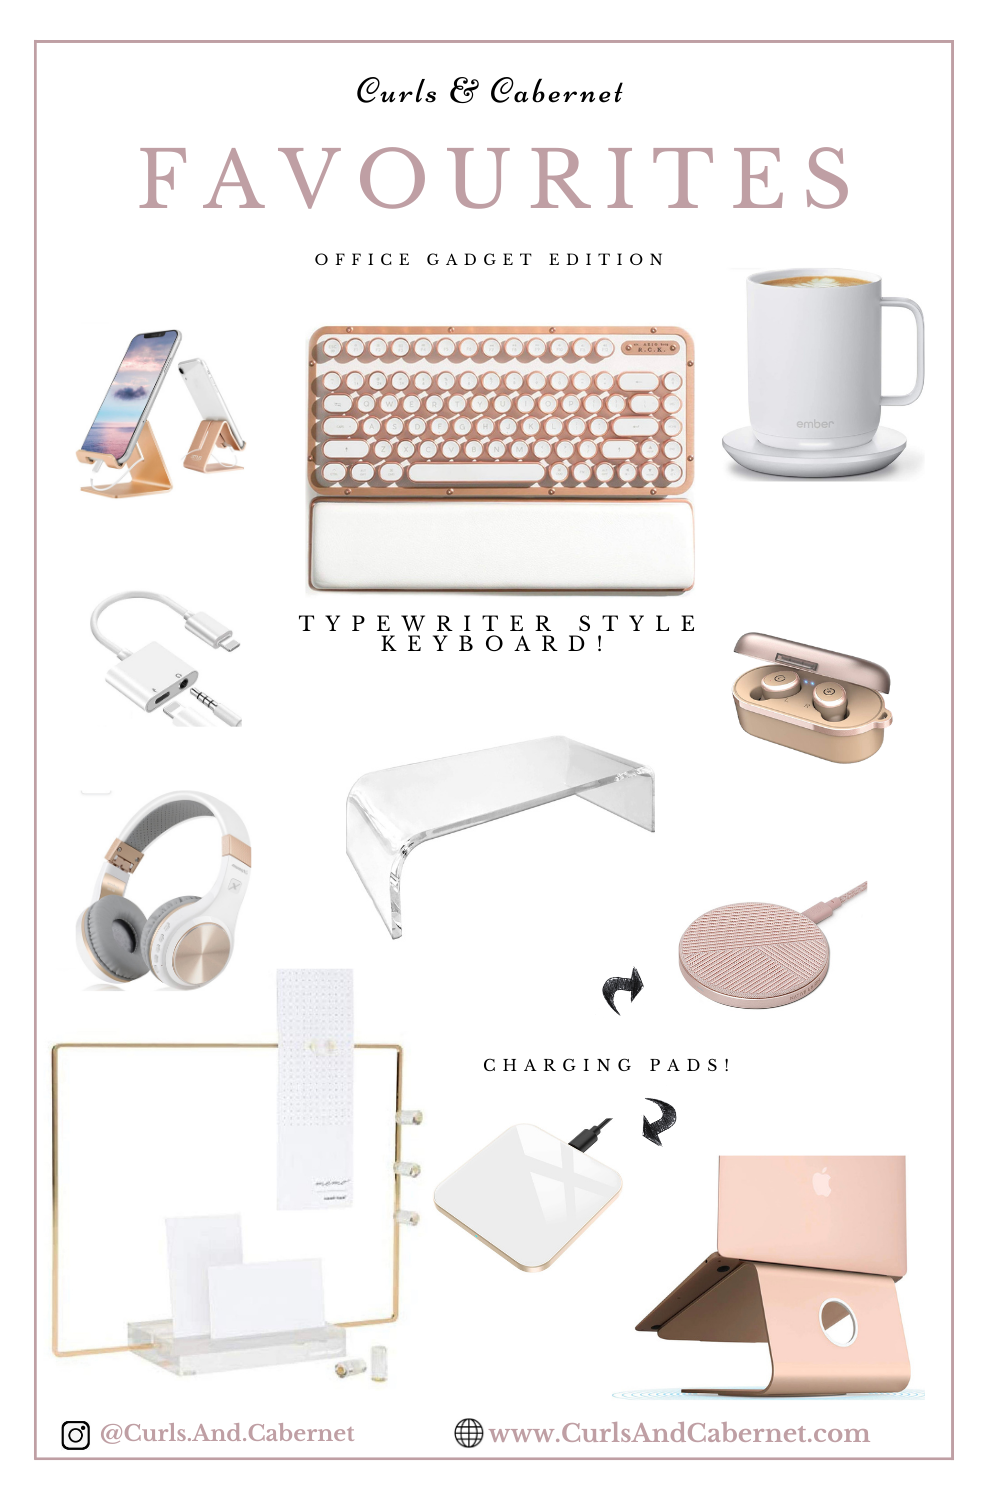 Favourite: Chic Office Gadgets and Gizmos - Curls & Cabernet